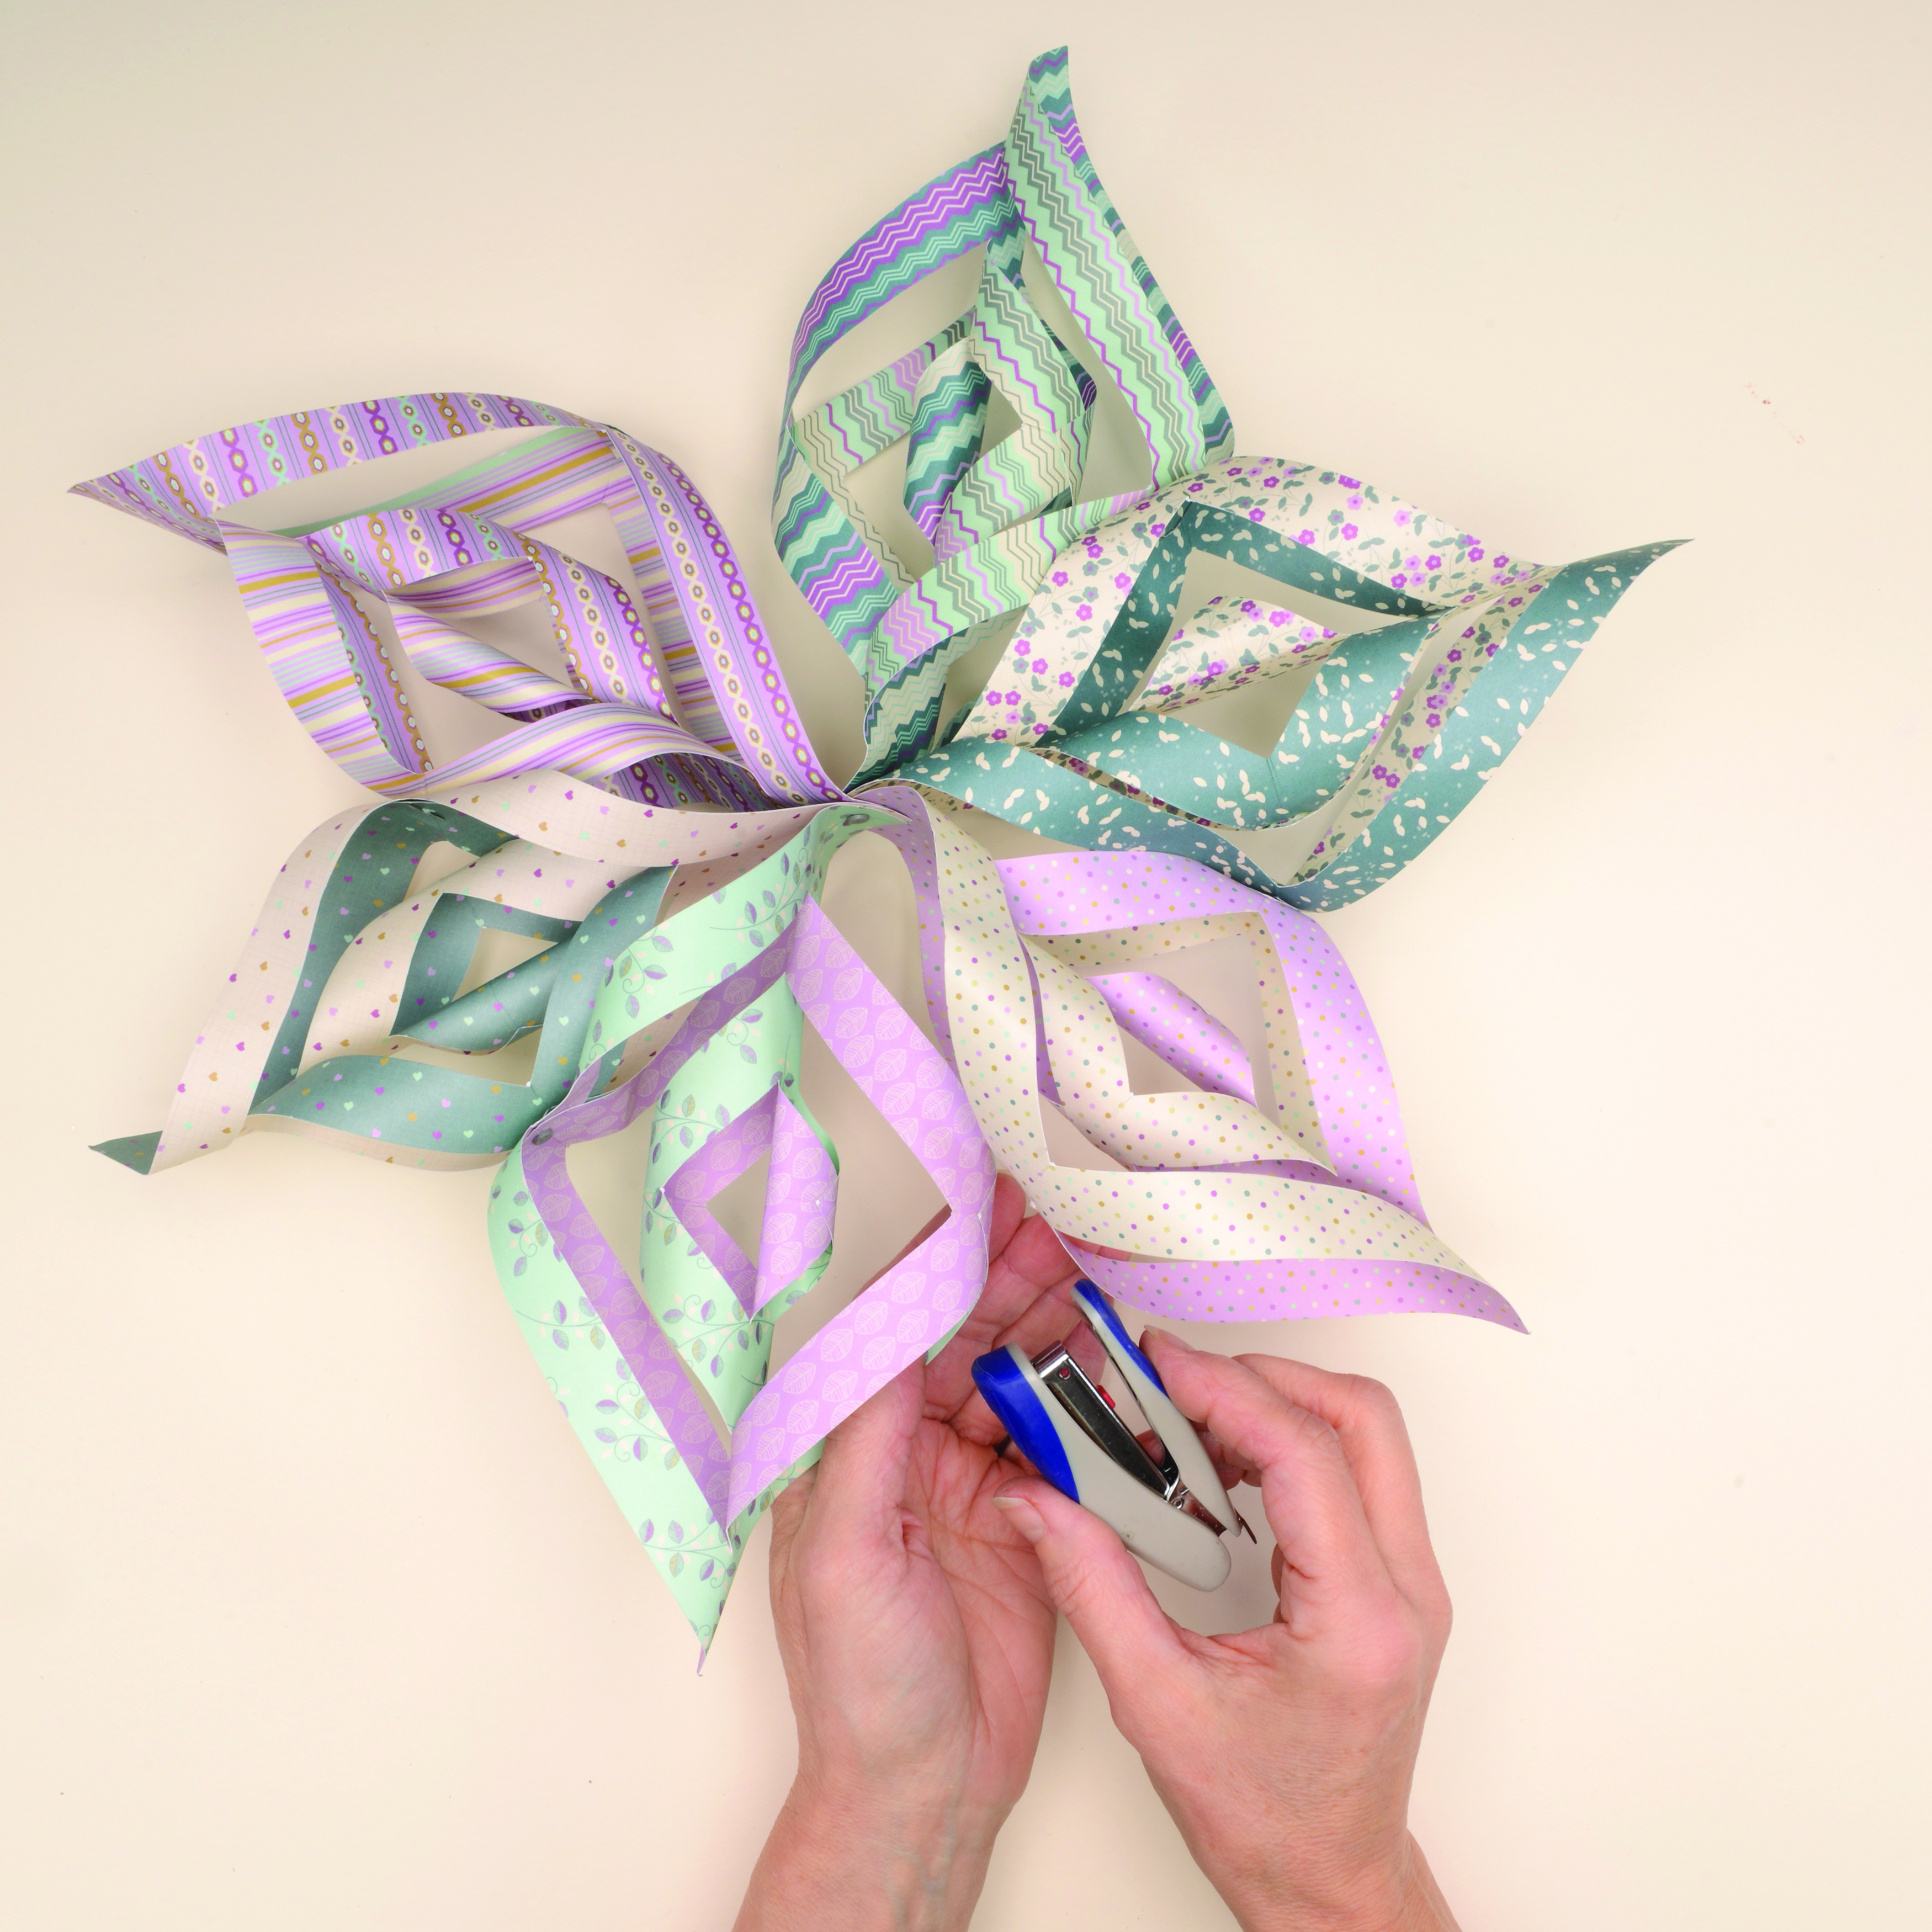 How to make a 3d paper snowflake – step 7